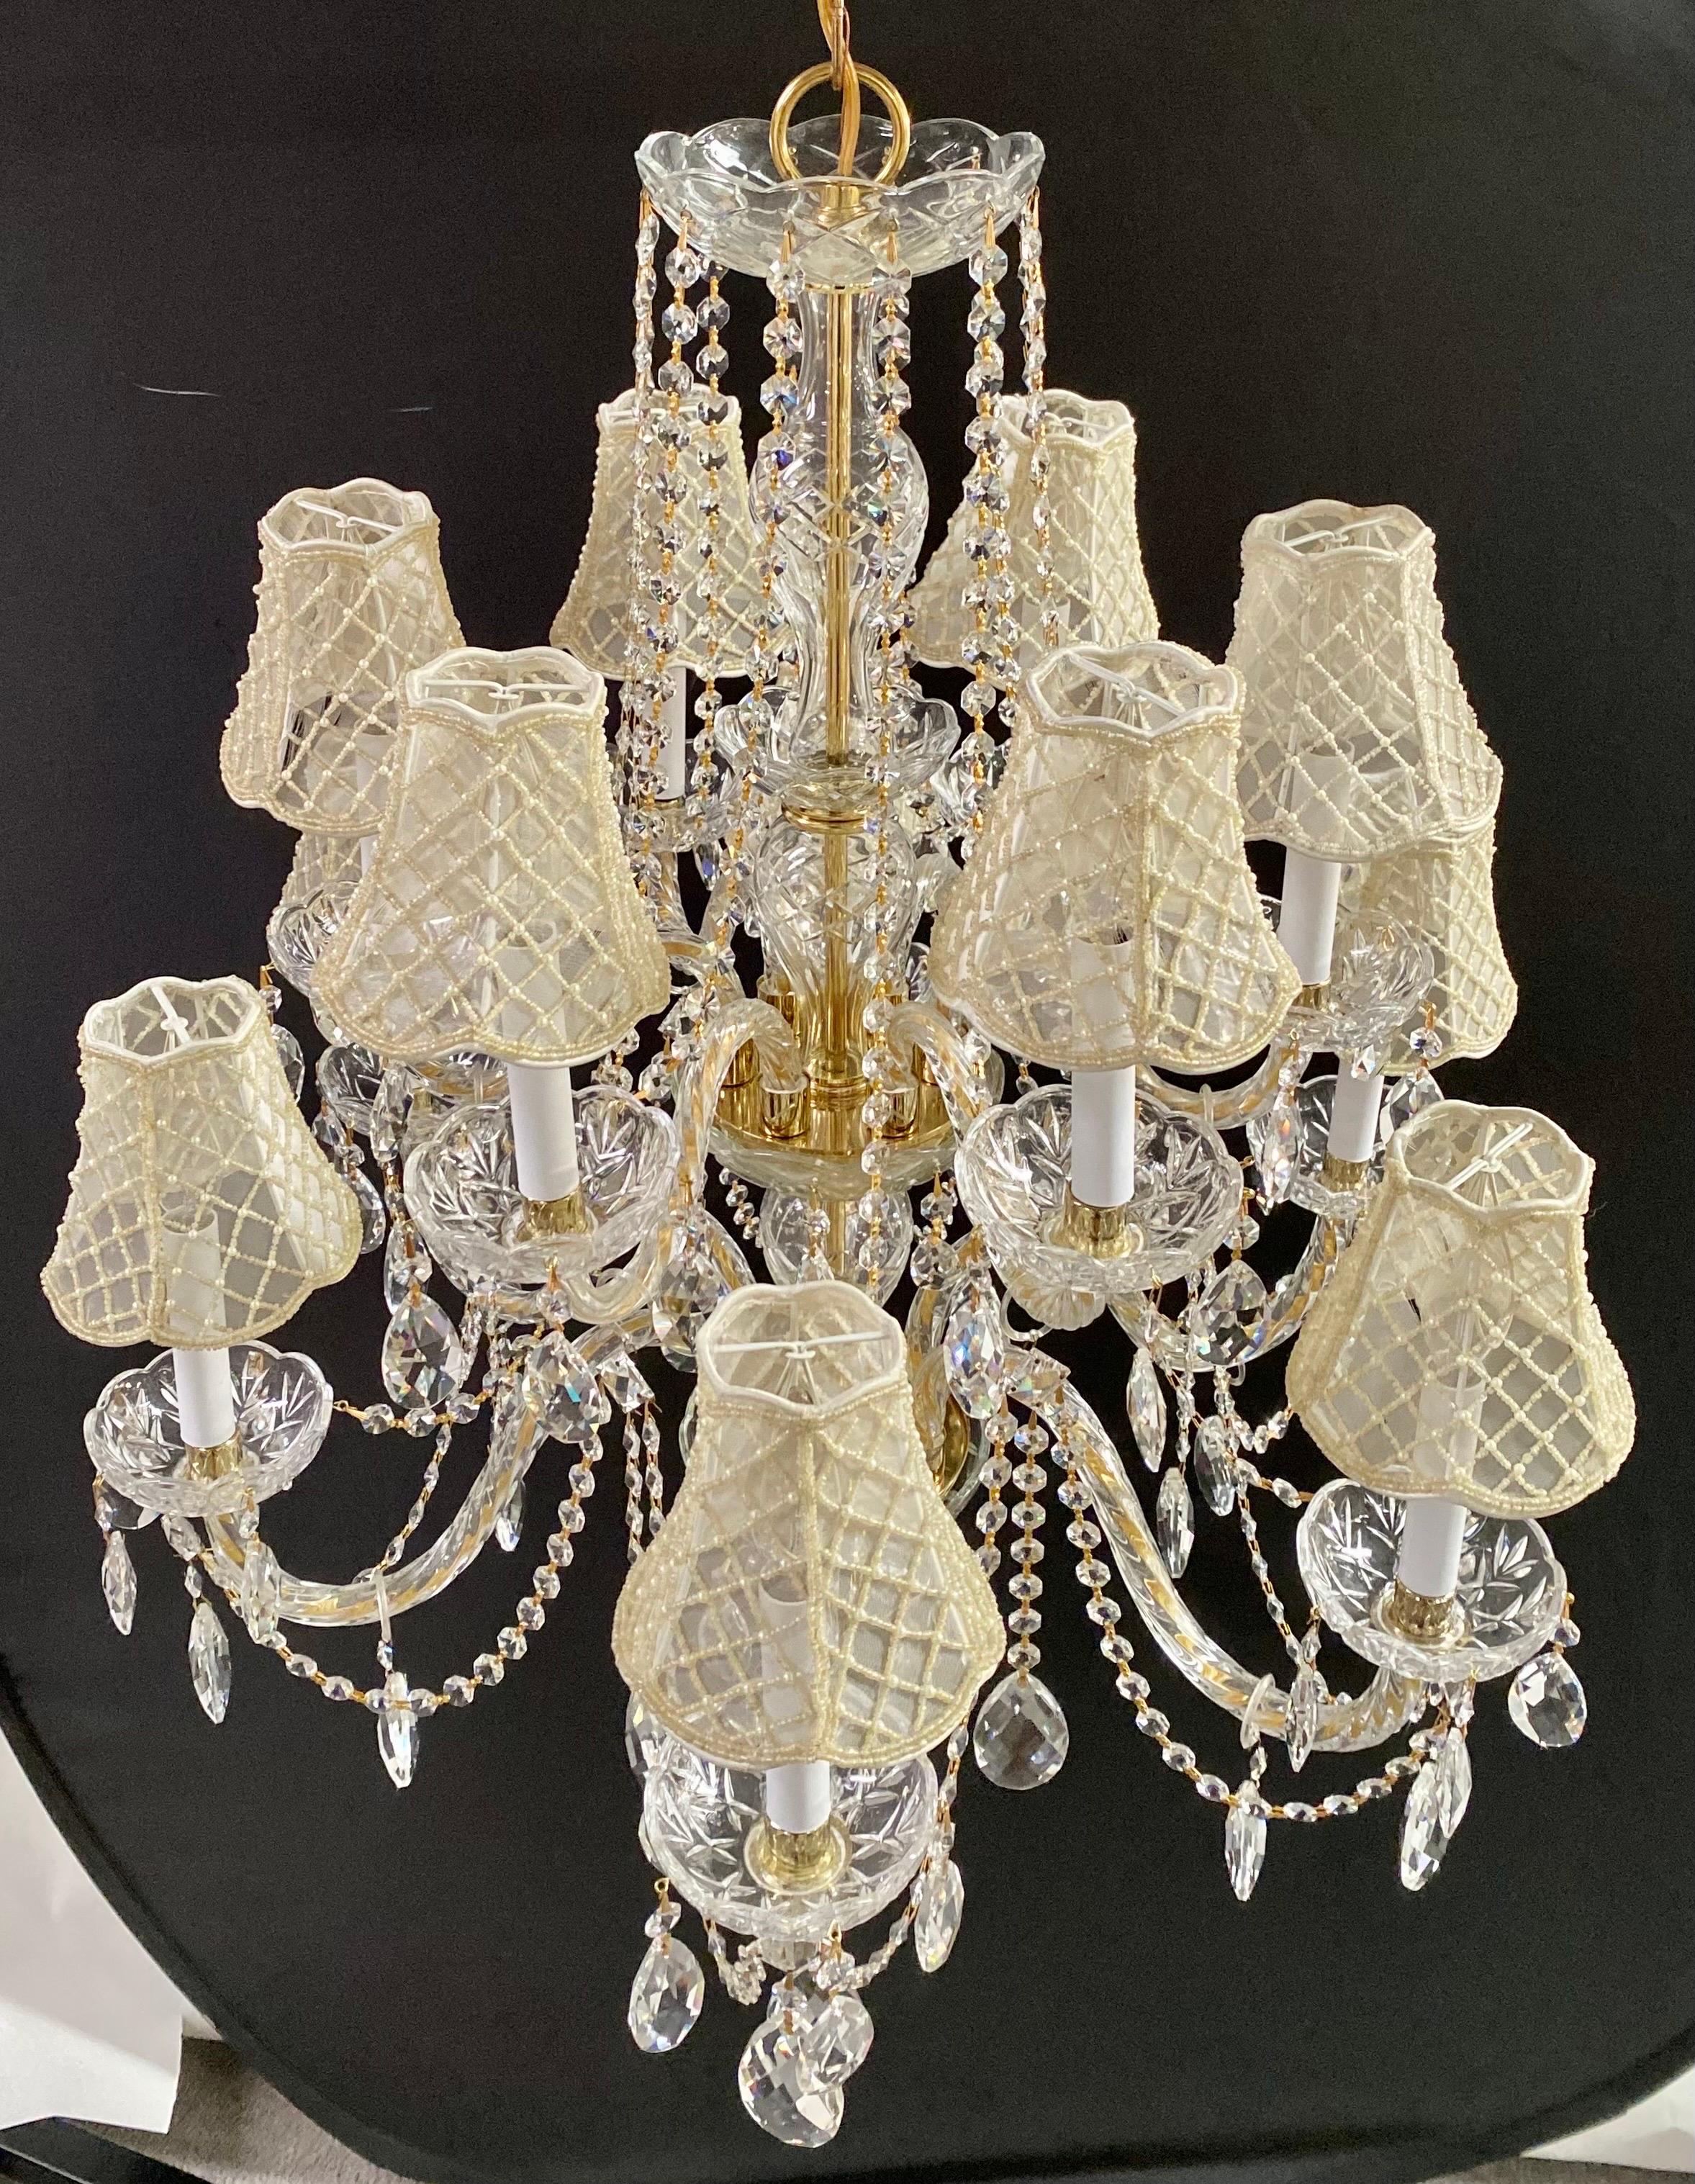 In the grand tradition of French Regency aesthetics, the resplendent crystal chandelier emerges as a quintessential embodiment of opulence and refinement. Adorned with twelve gracefully sinuous glass arms, this magnificent fixture stands as a